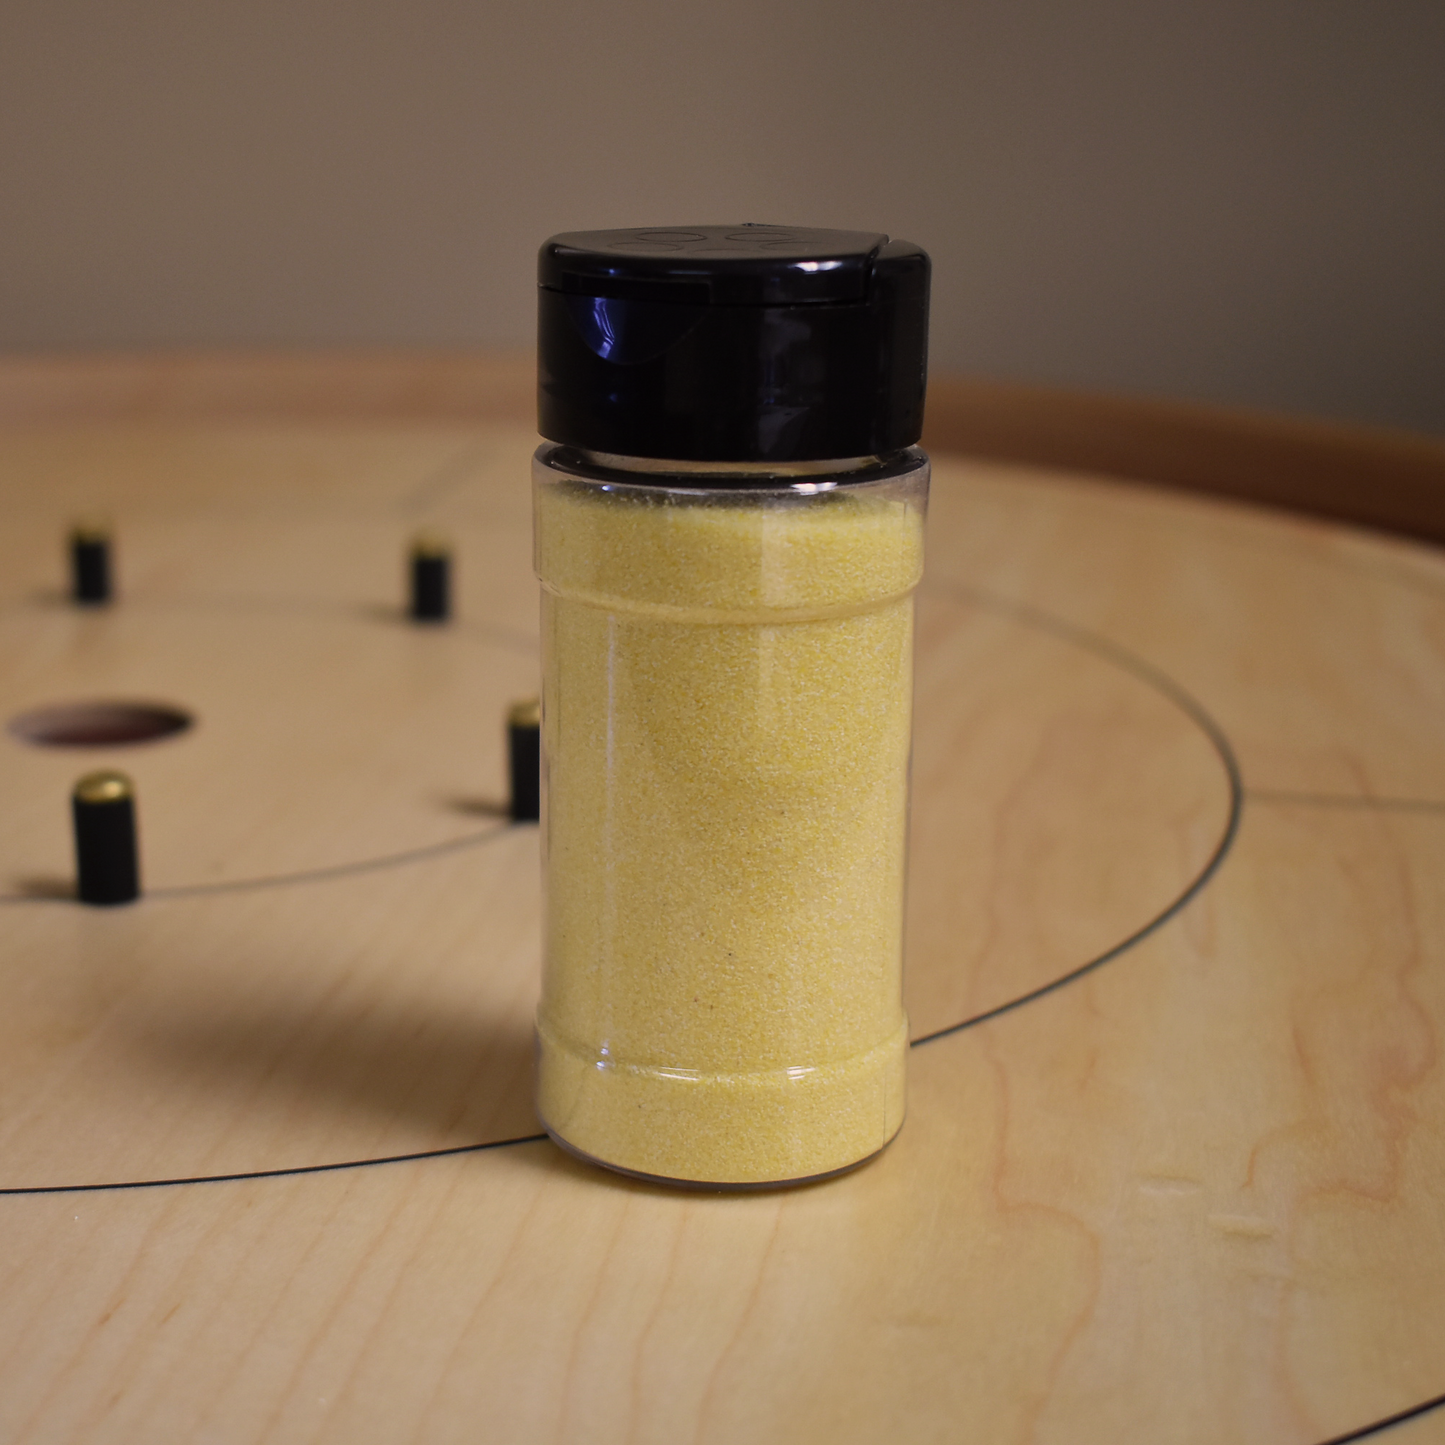 The Soccer Star - Tournament Style Crokinole Board Game Set (Meets NCA Standards)